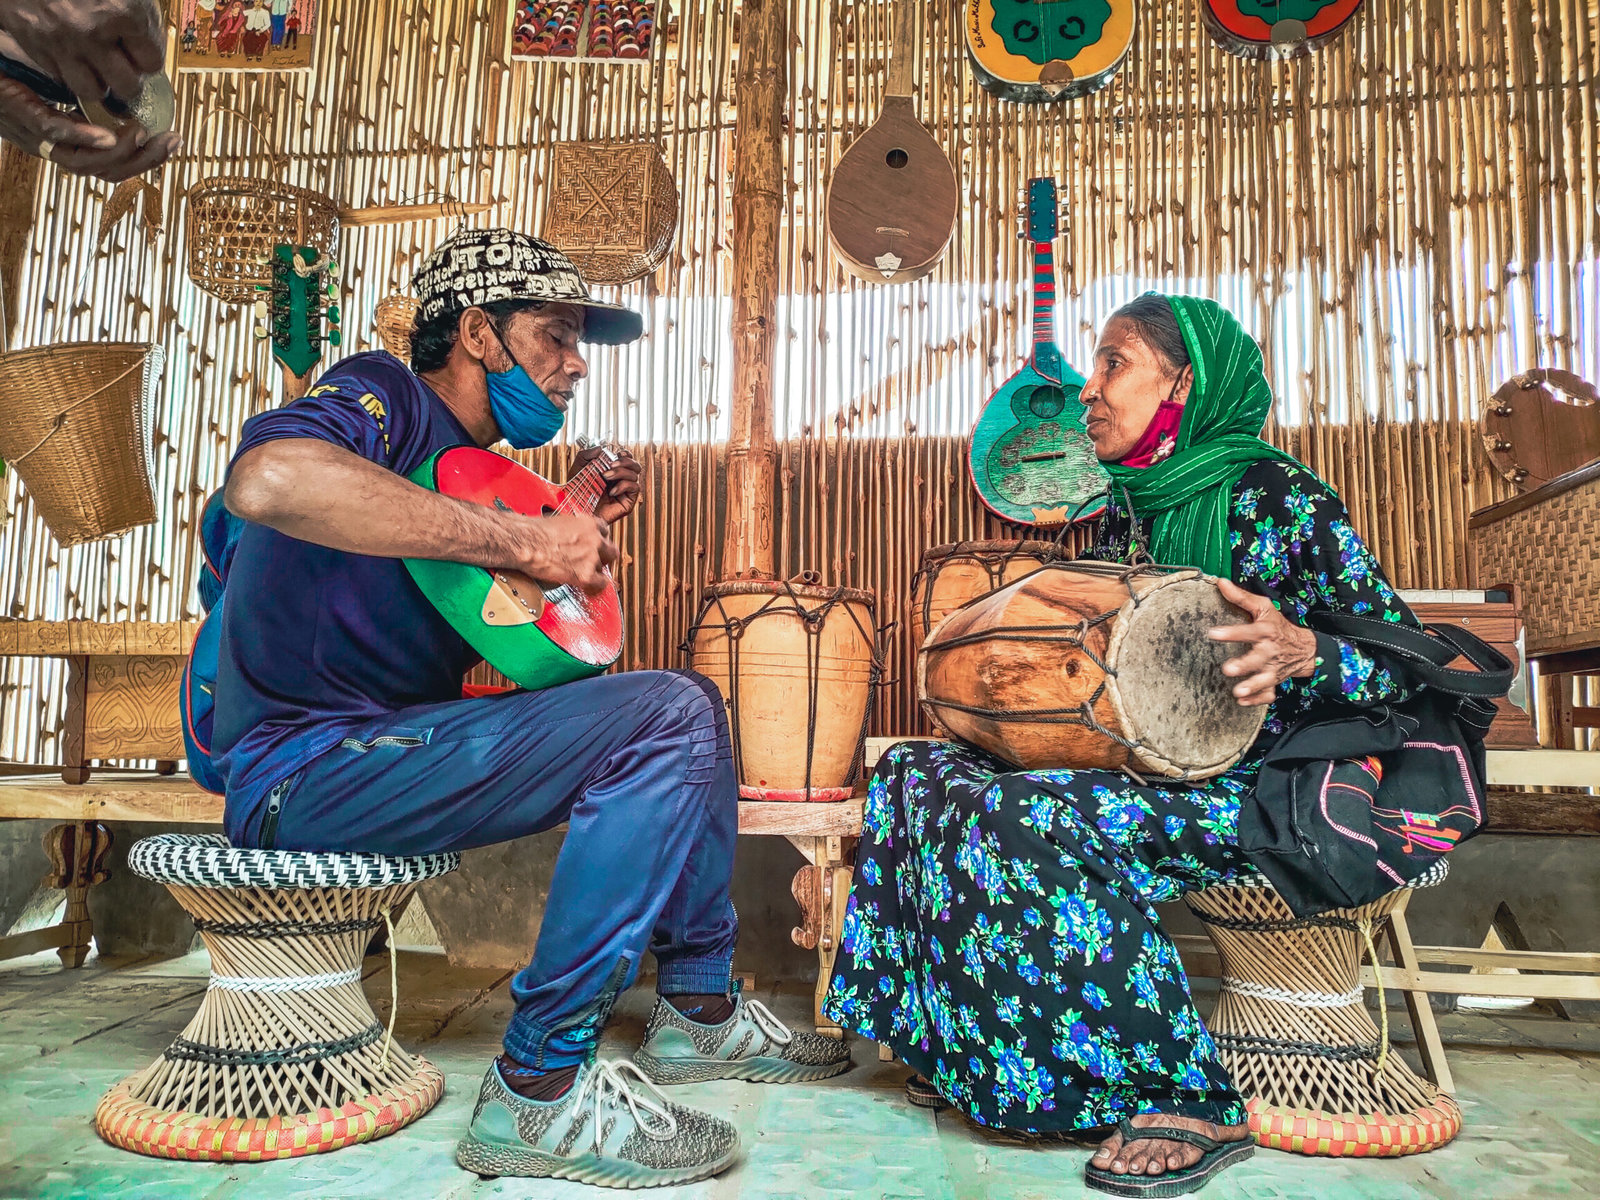 Two Rohingya musicians sing and play instruments.